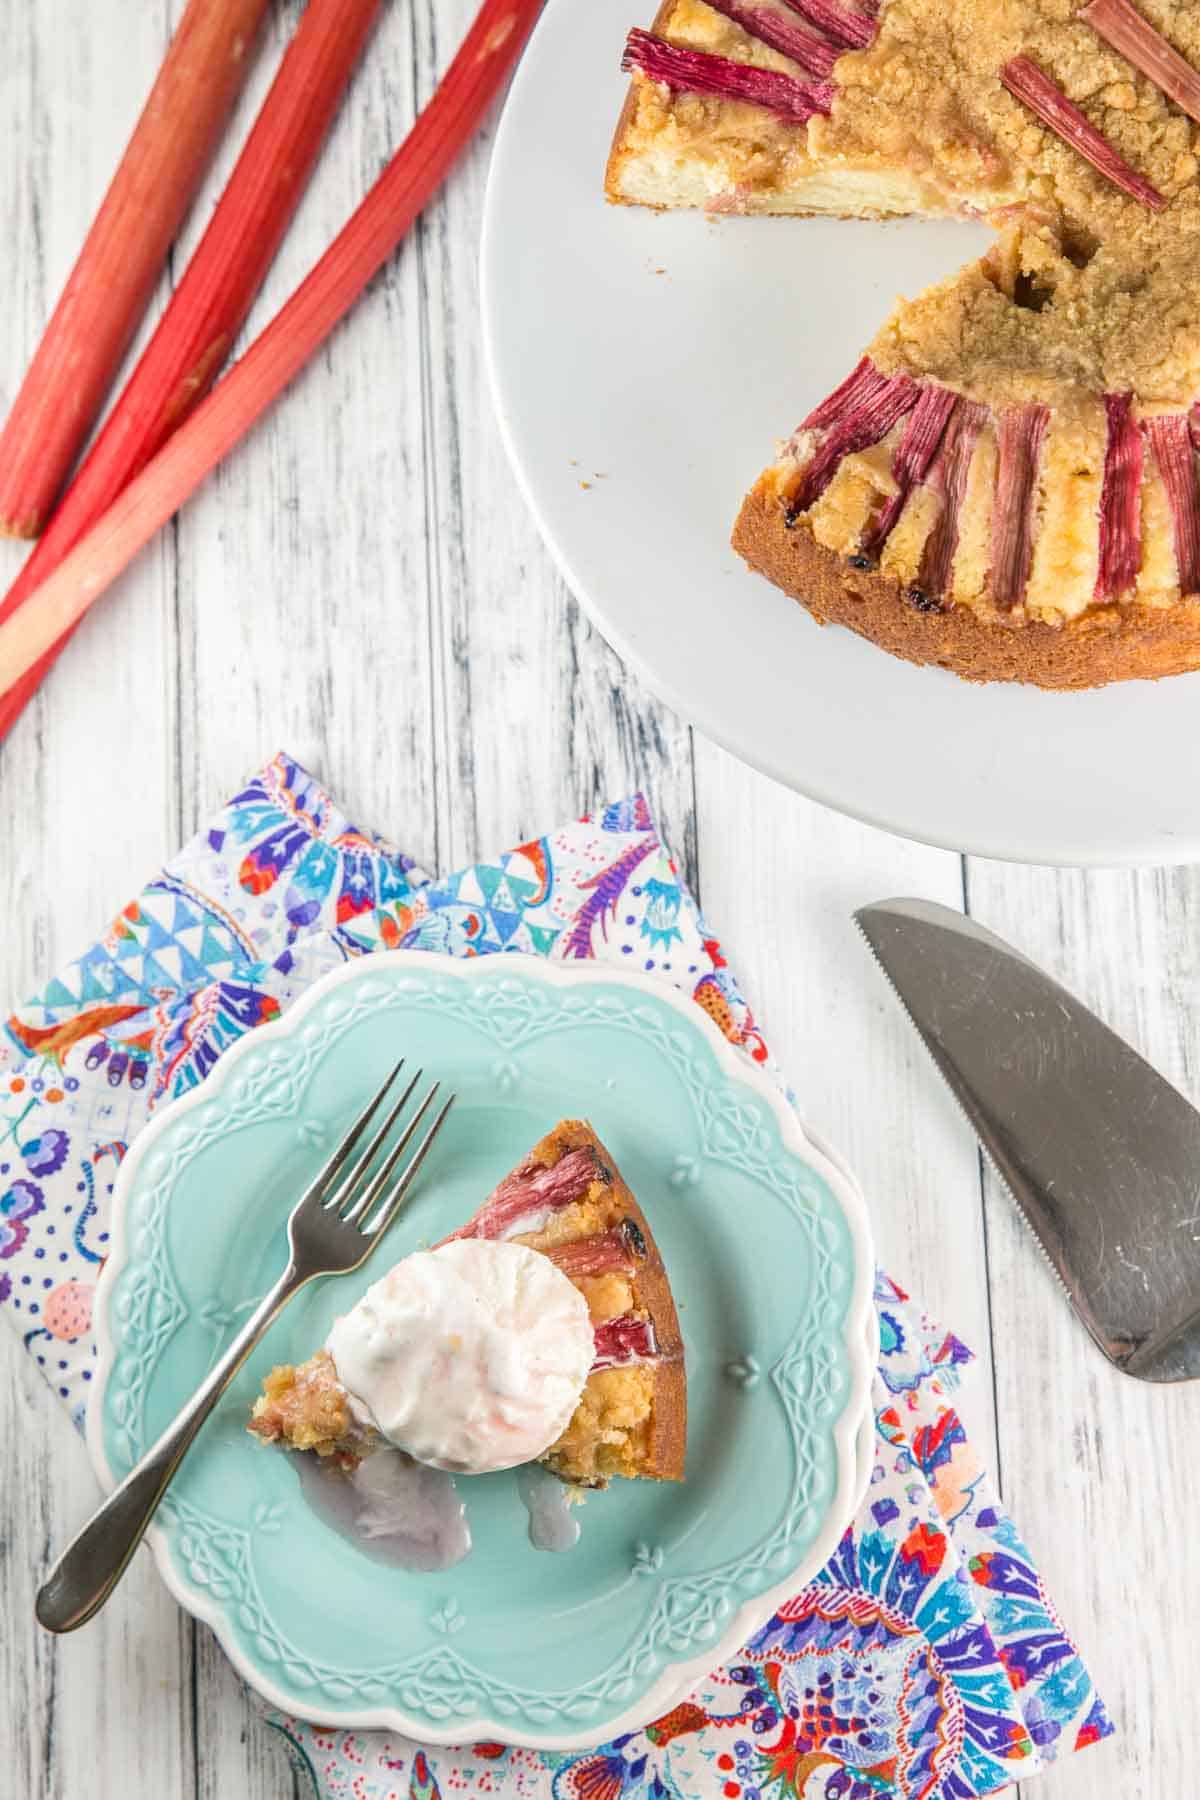 slice of almond rhubarb cake on a blue dessert plate with a big scoop of ice cream